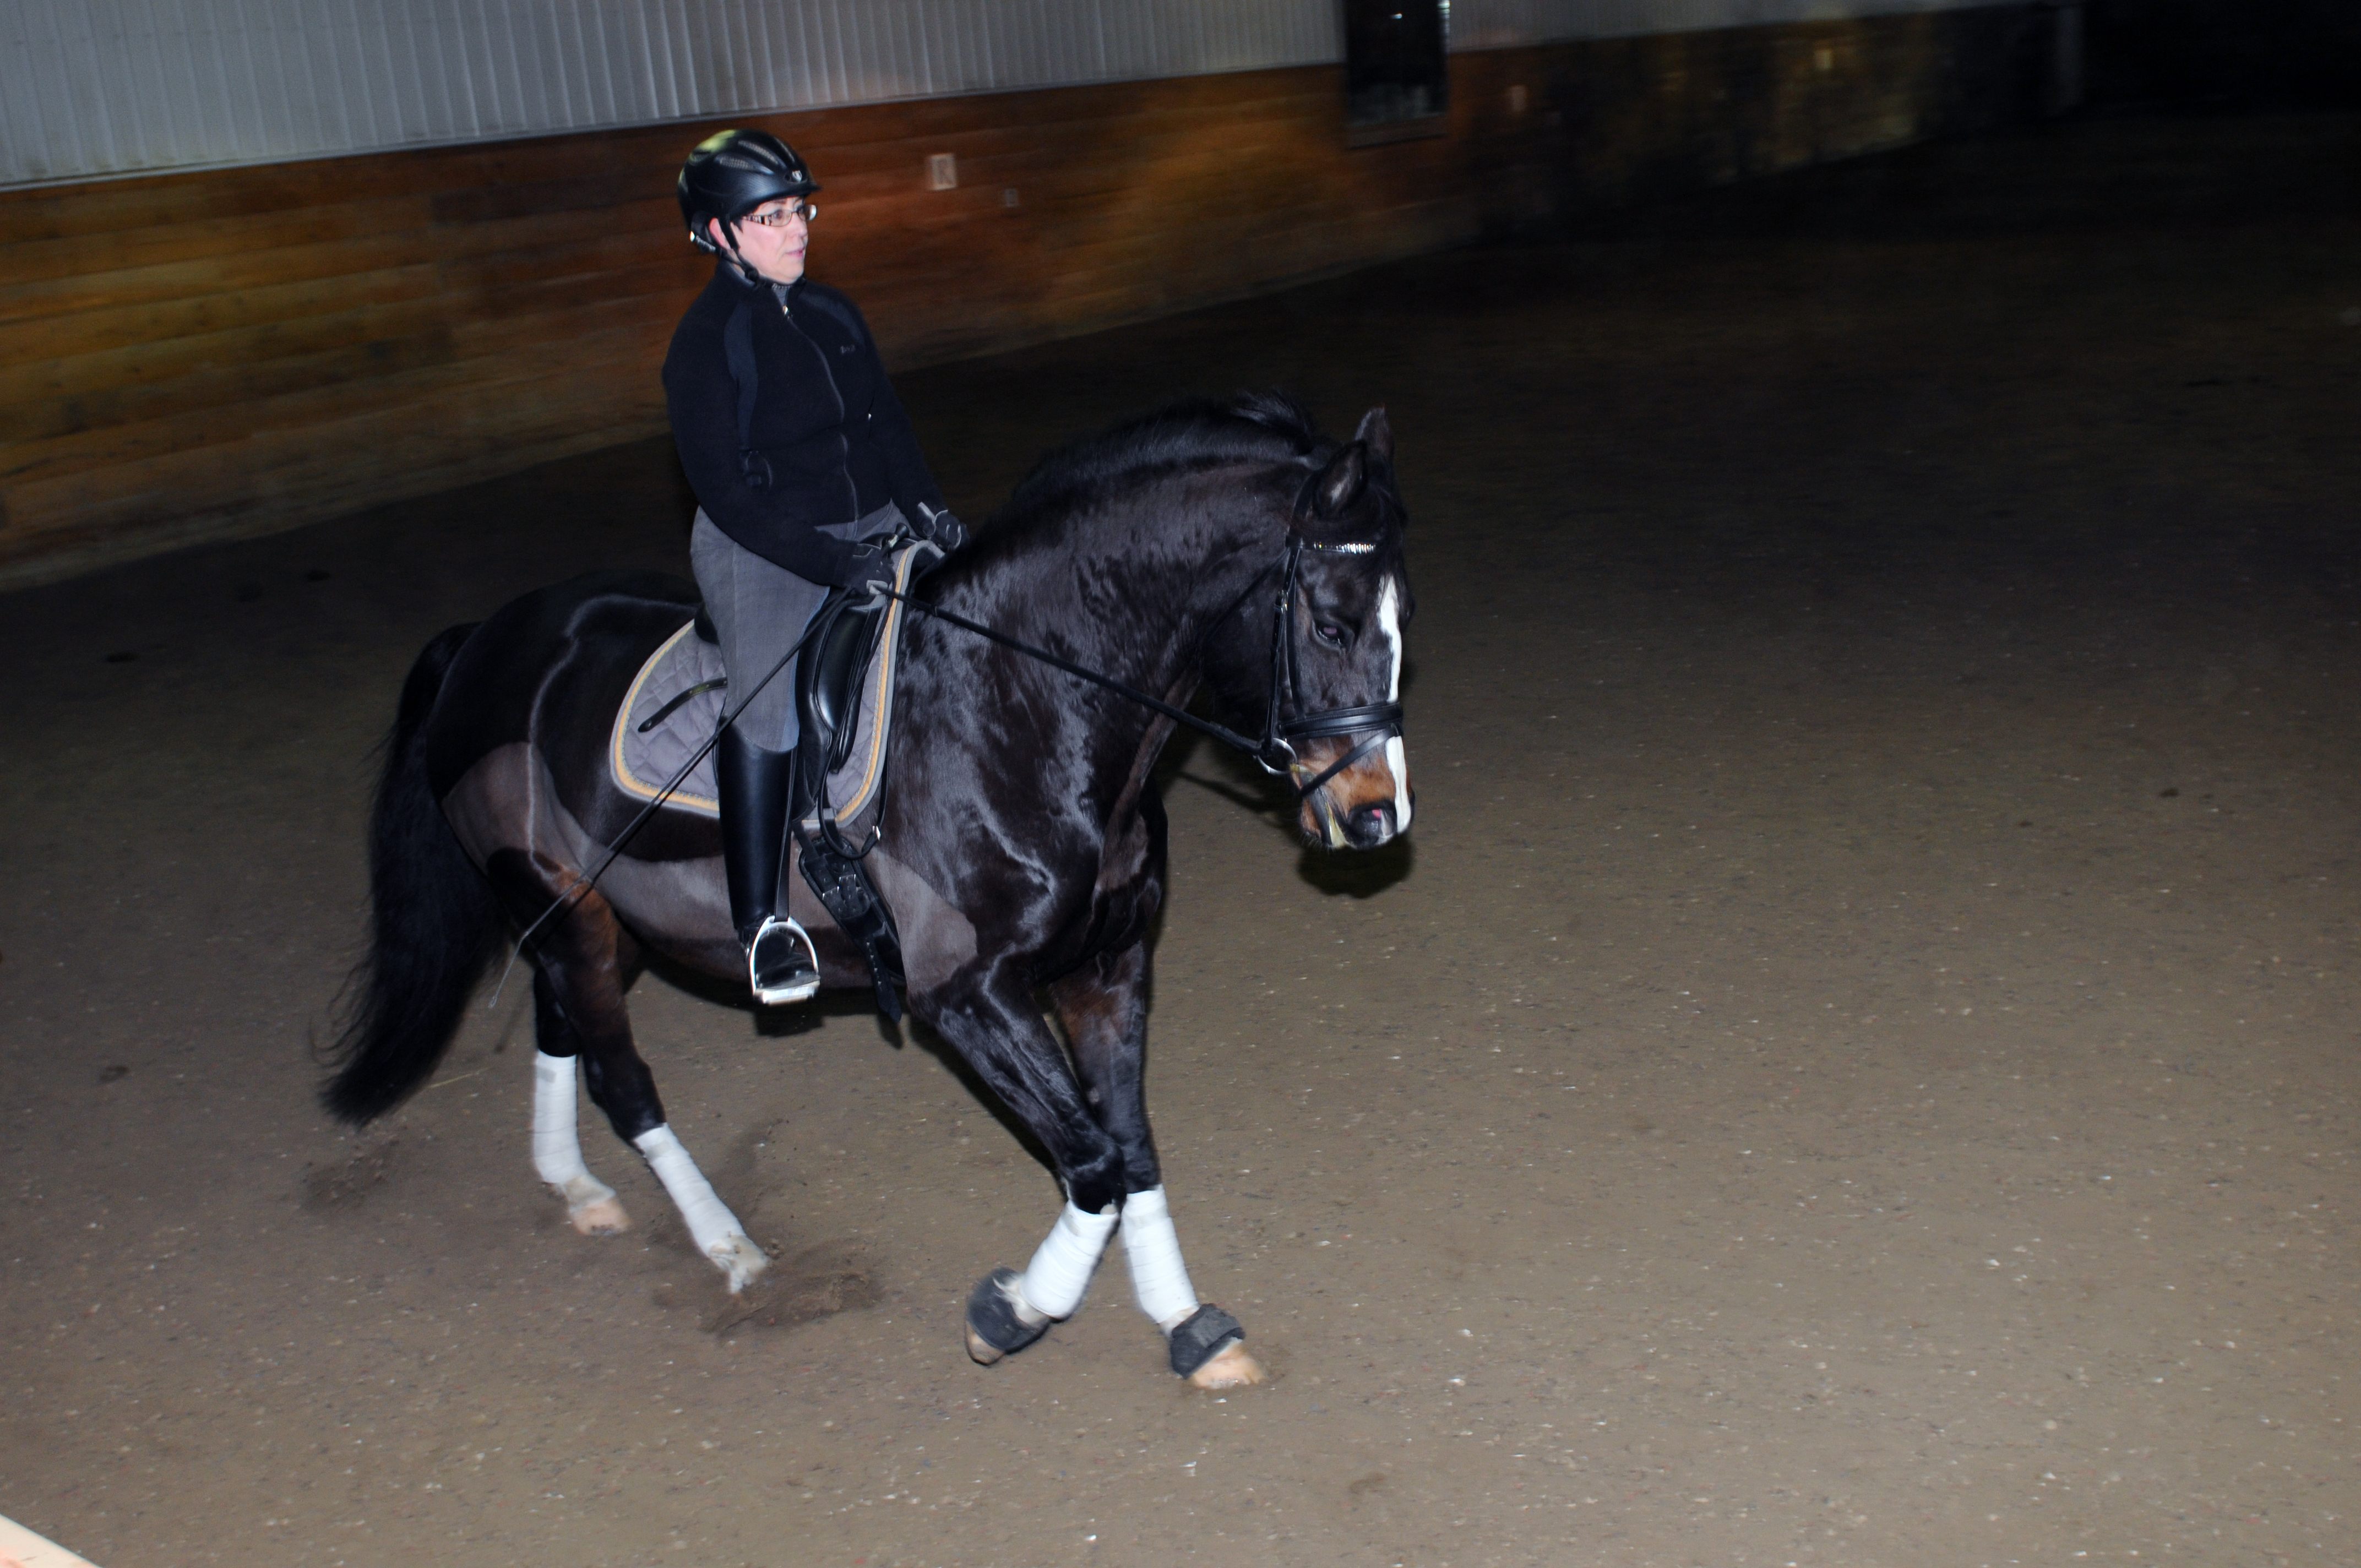 SIMPLE CANTER- Jean Duckering rides around the Burnt Lake Stable recently practicing dressage with her horse.